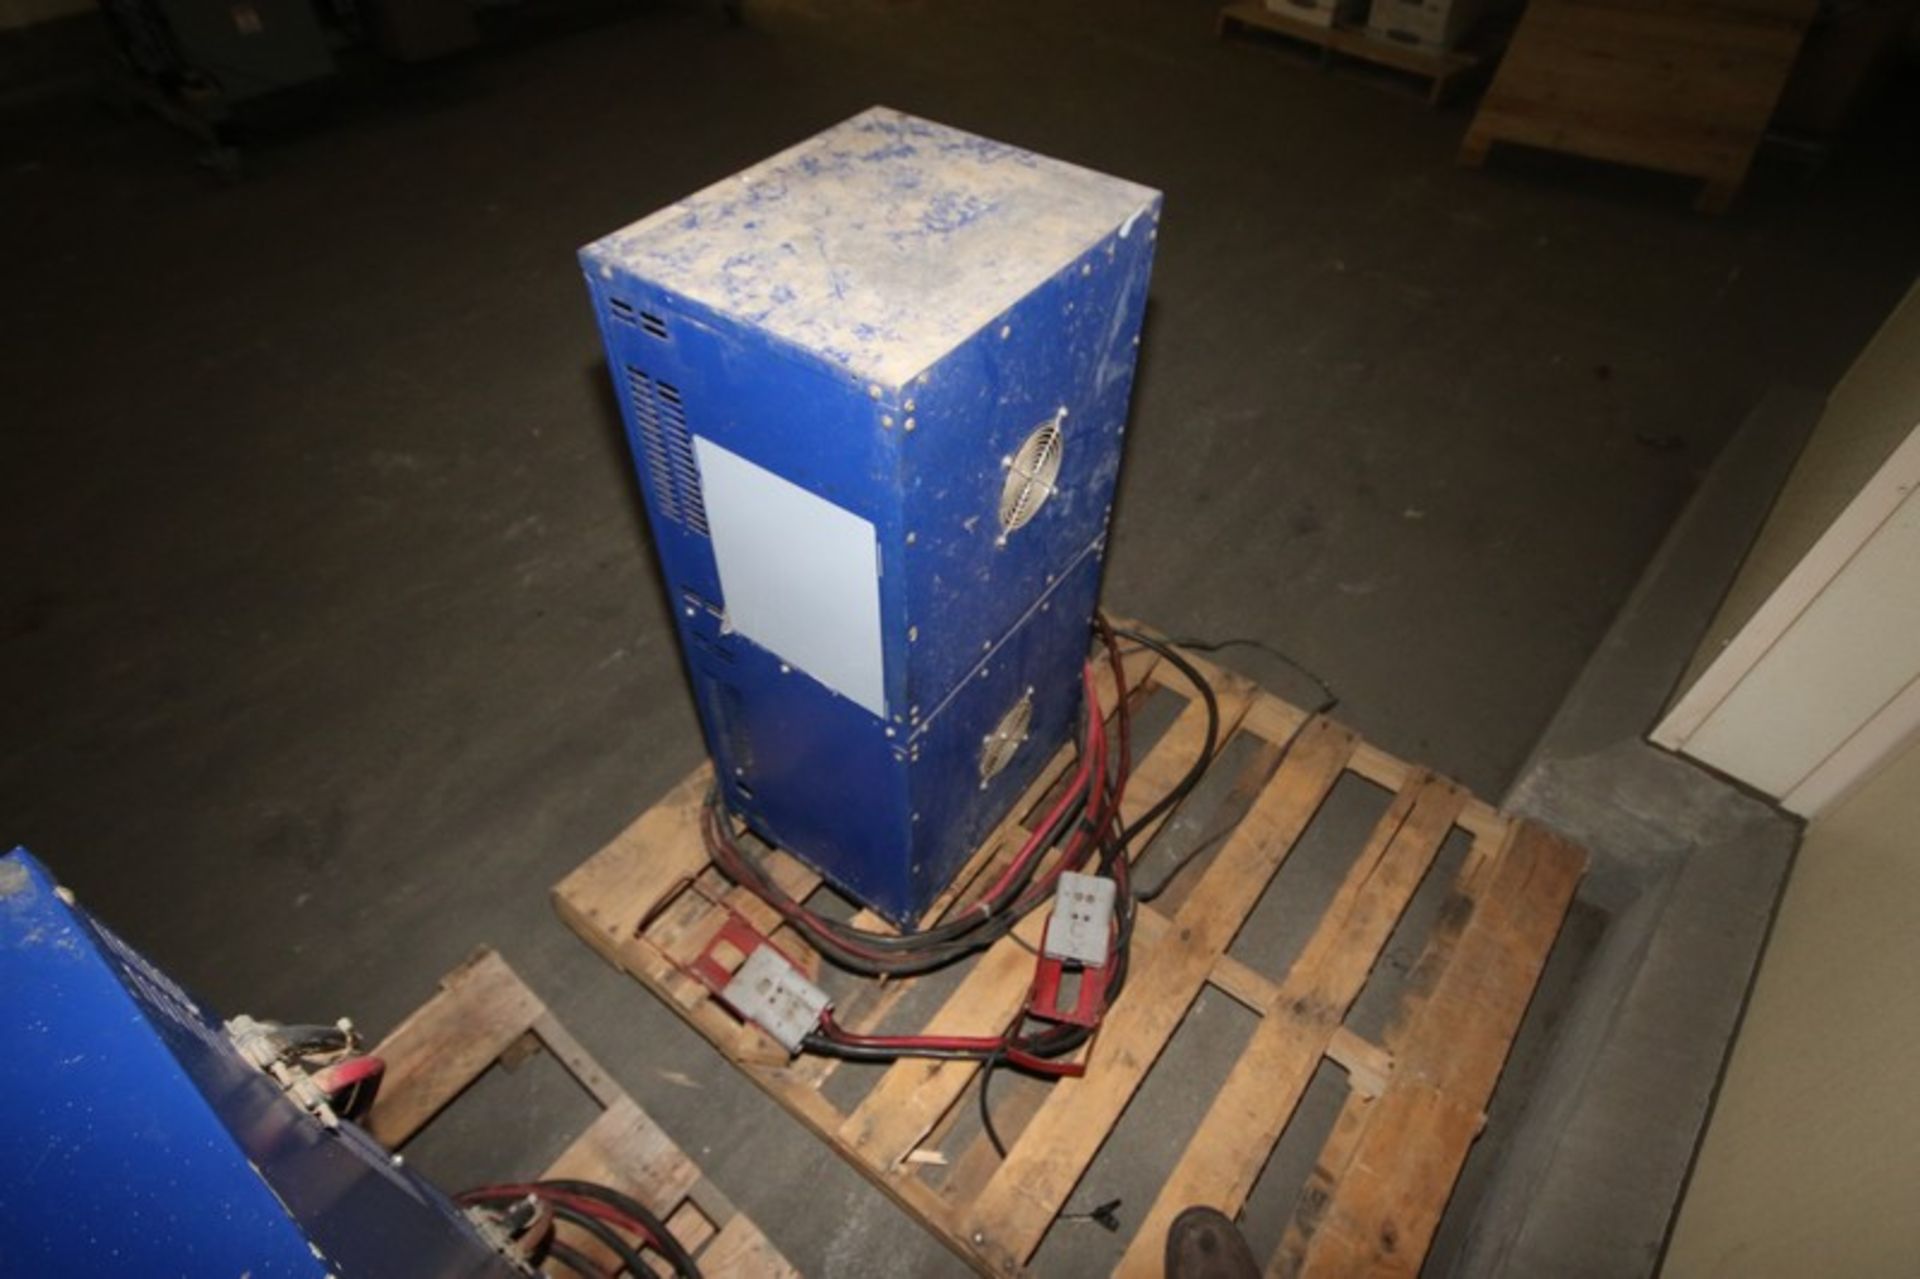 Infinity High Frequency Forklift Battery Charger, M/N FC18/13, S/N 2013010706, 480 Volts, 3 Phase, - Image 6 of 6